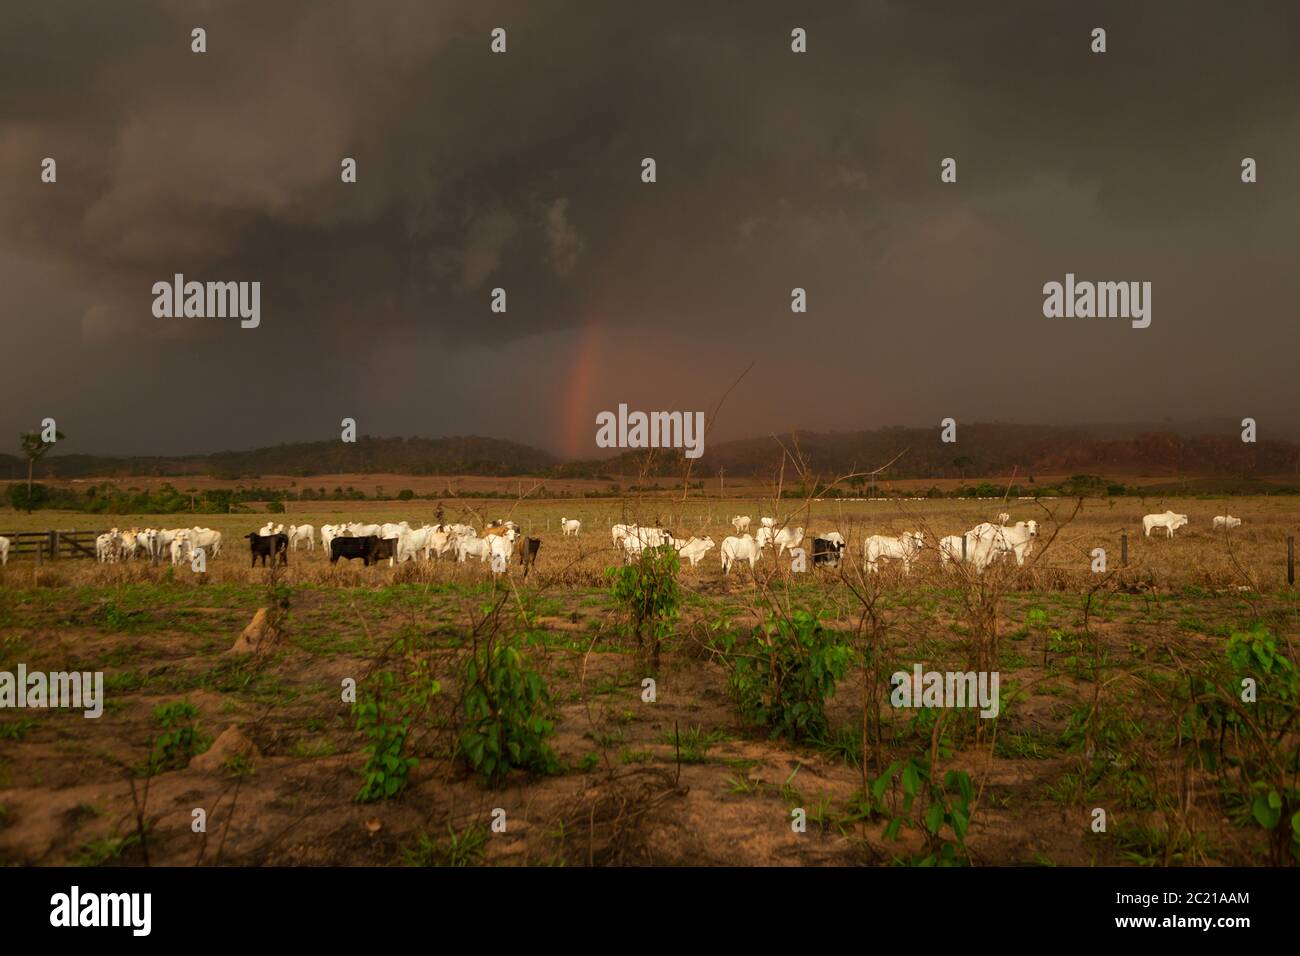 Cattle on farm pasture with cloudy storm rainbow in the background in the Amazon rainforest. Concept of deforestation, environment, agriculture, co2. Stock Photo